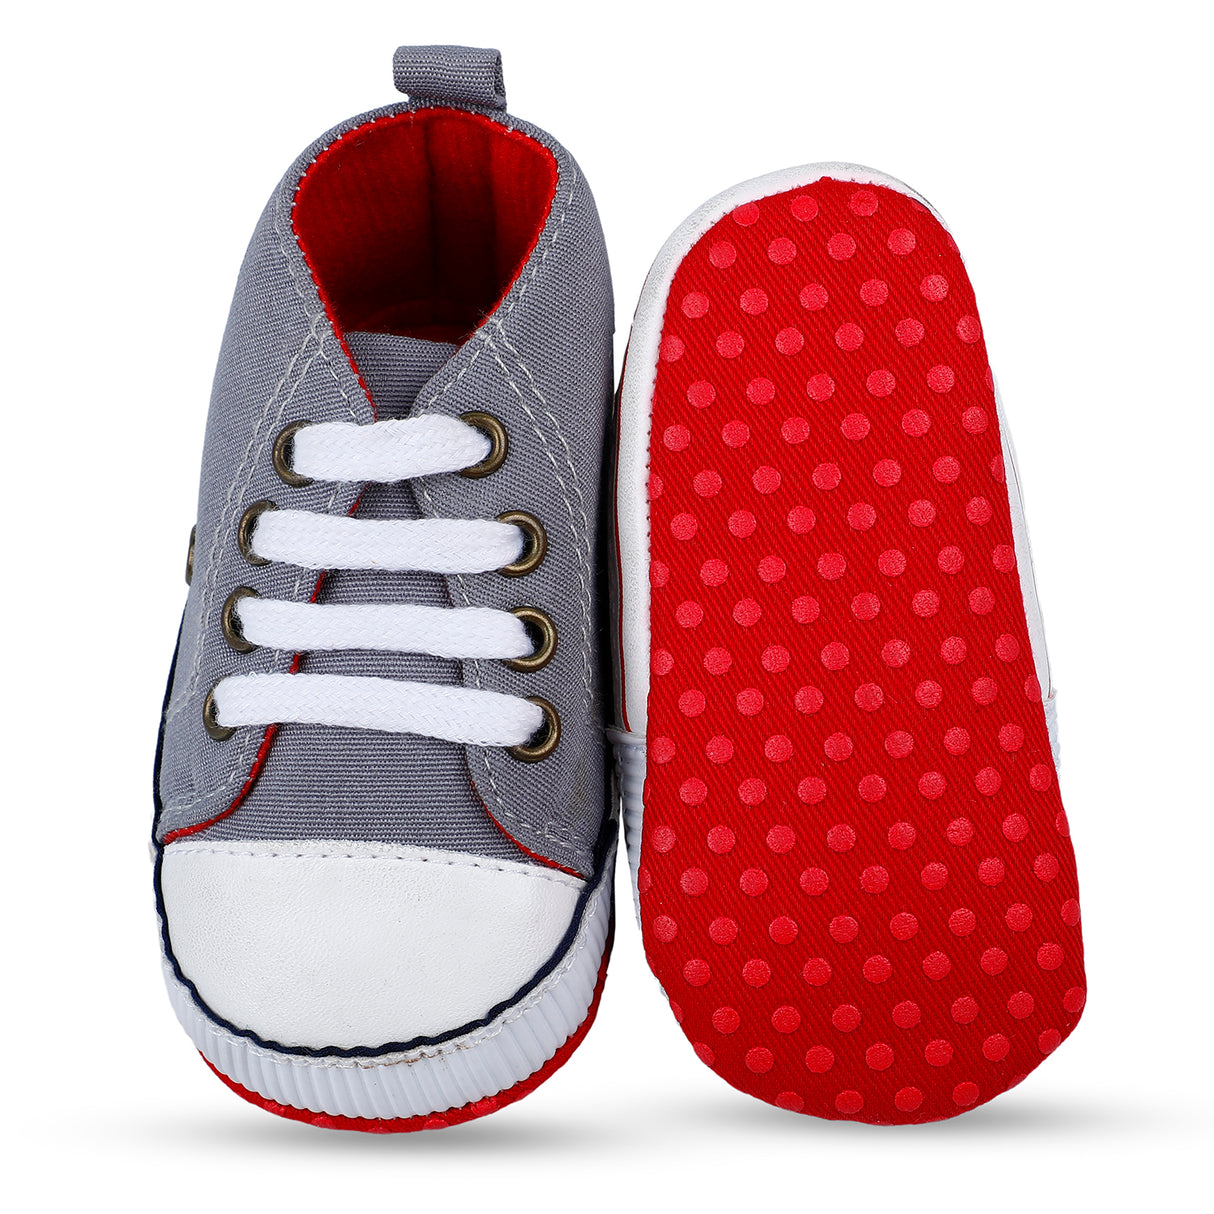 Canvas Breathable Boys Anti-Skid Sneakers